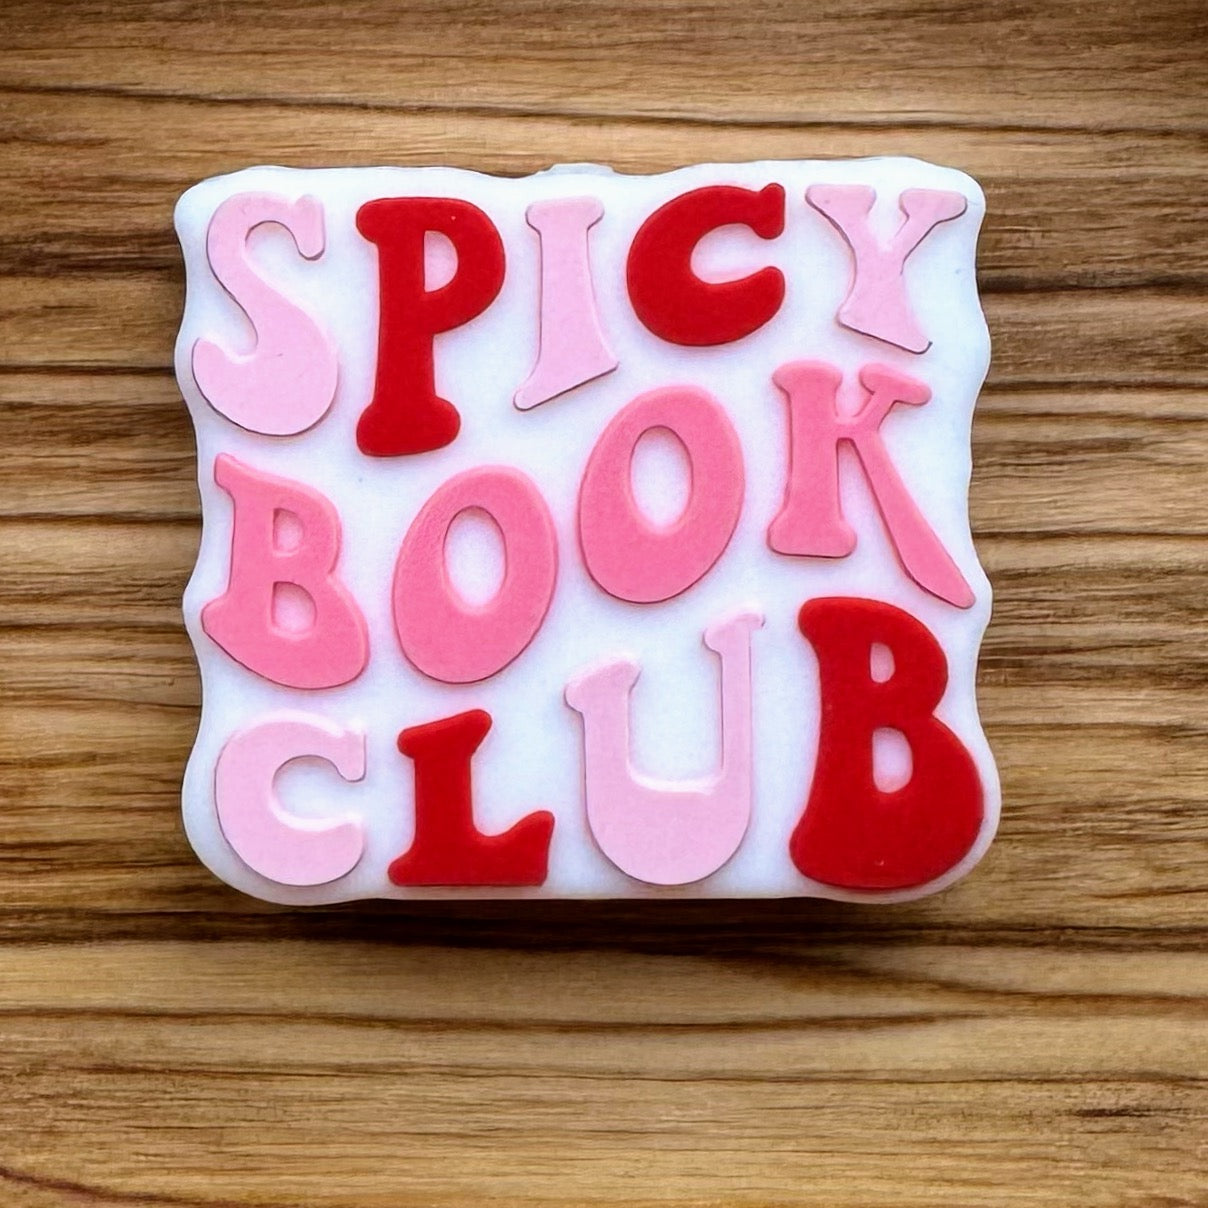 Spicy Book Club Focal